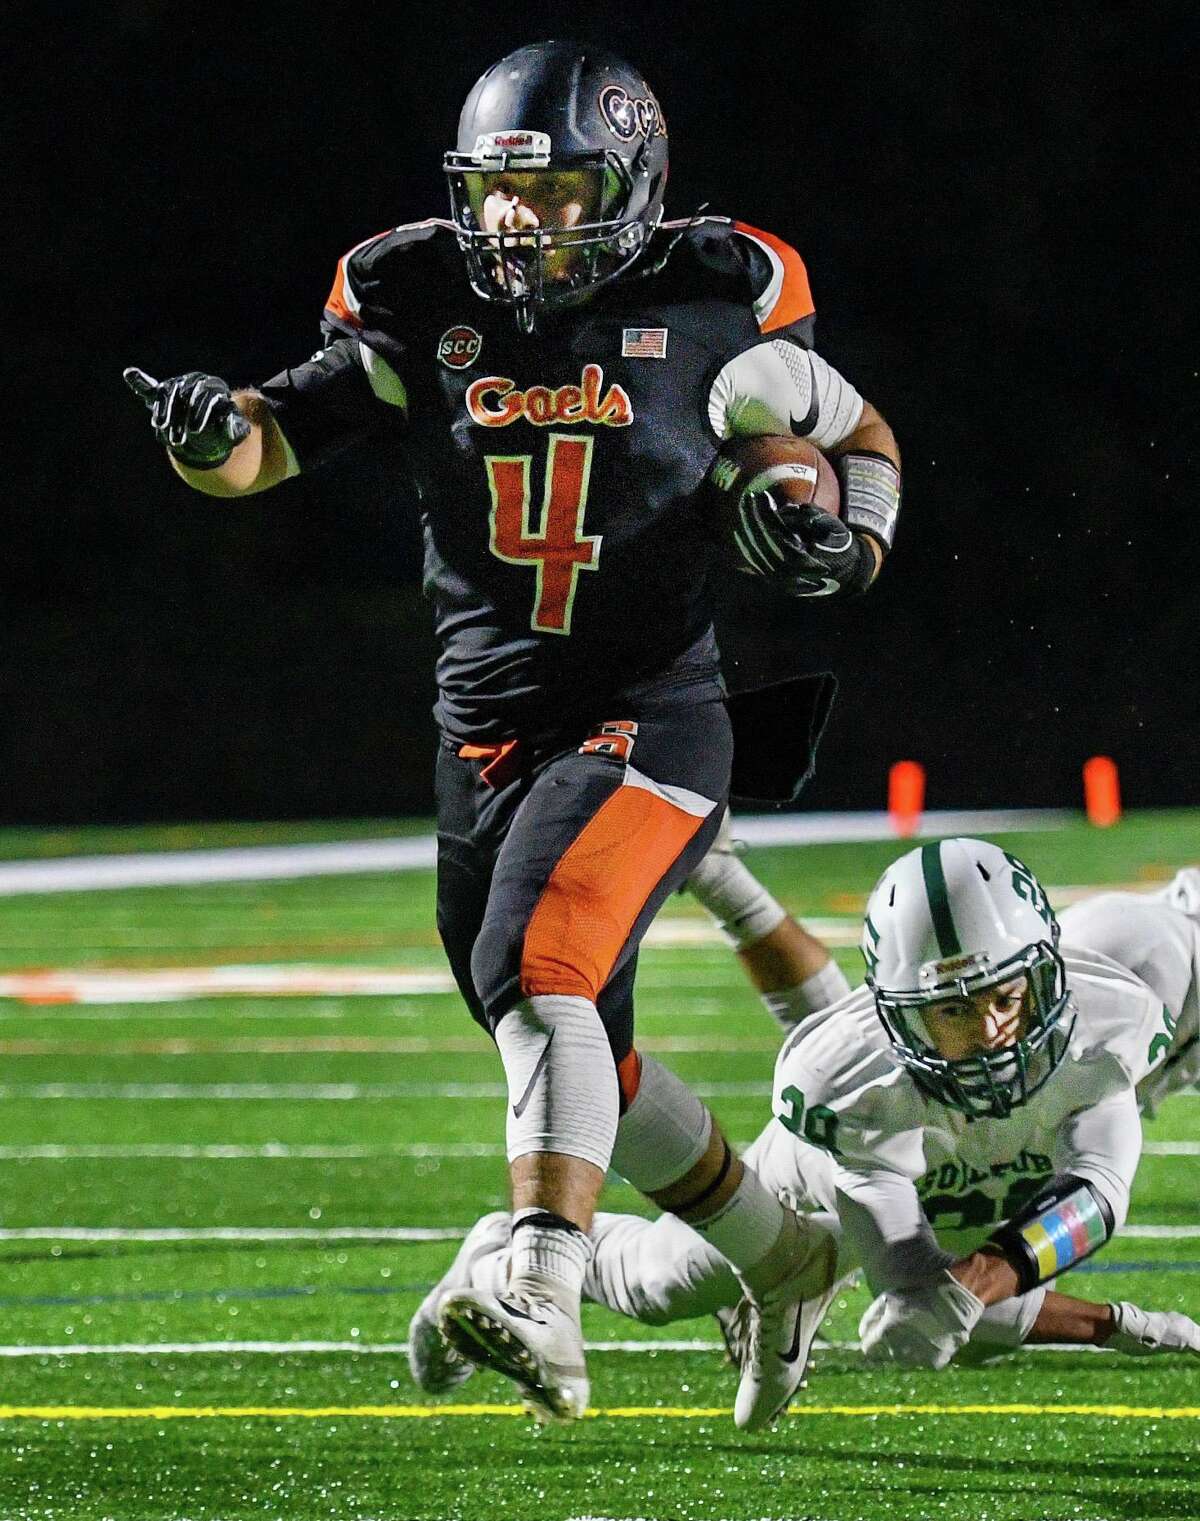 Georgio Ghazal will power the Shelton High running game when the Gaels open their season with West Haven at Finn Stadium on Friday, Sept. 13, at 7 p.m.